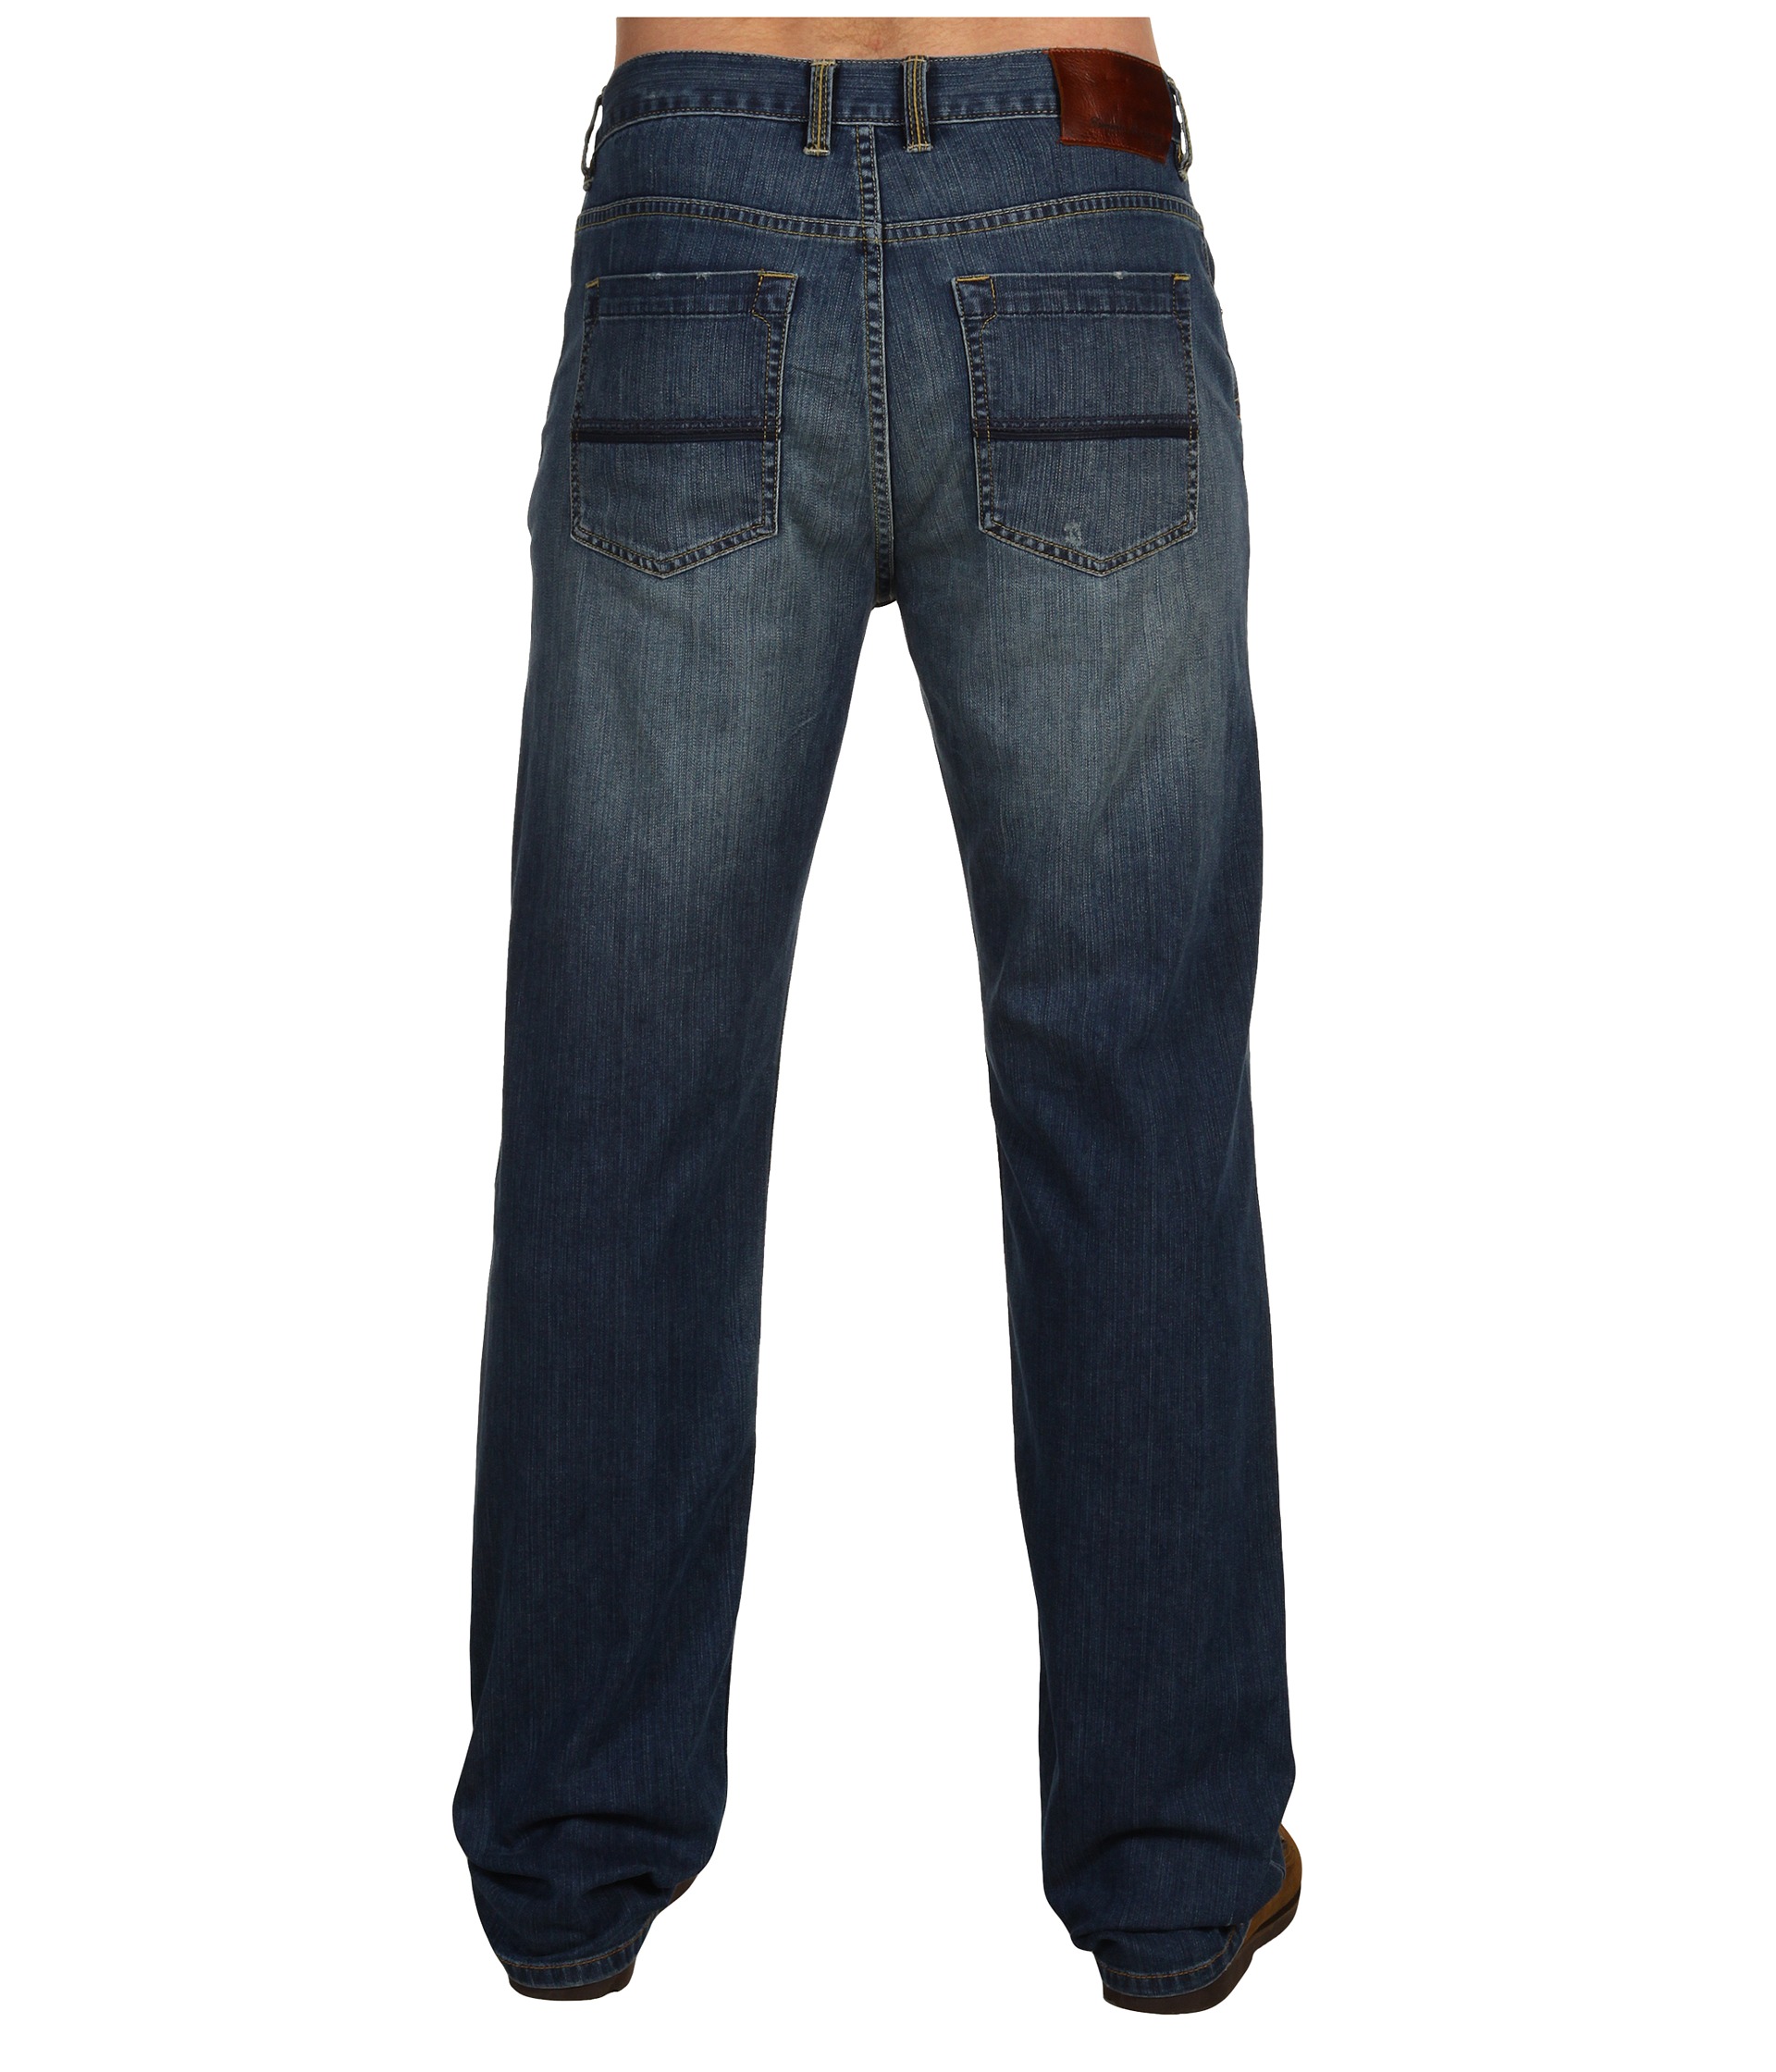 Tommy Bahama Denim Classic Blue Dylan Jeans $118.00  